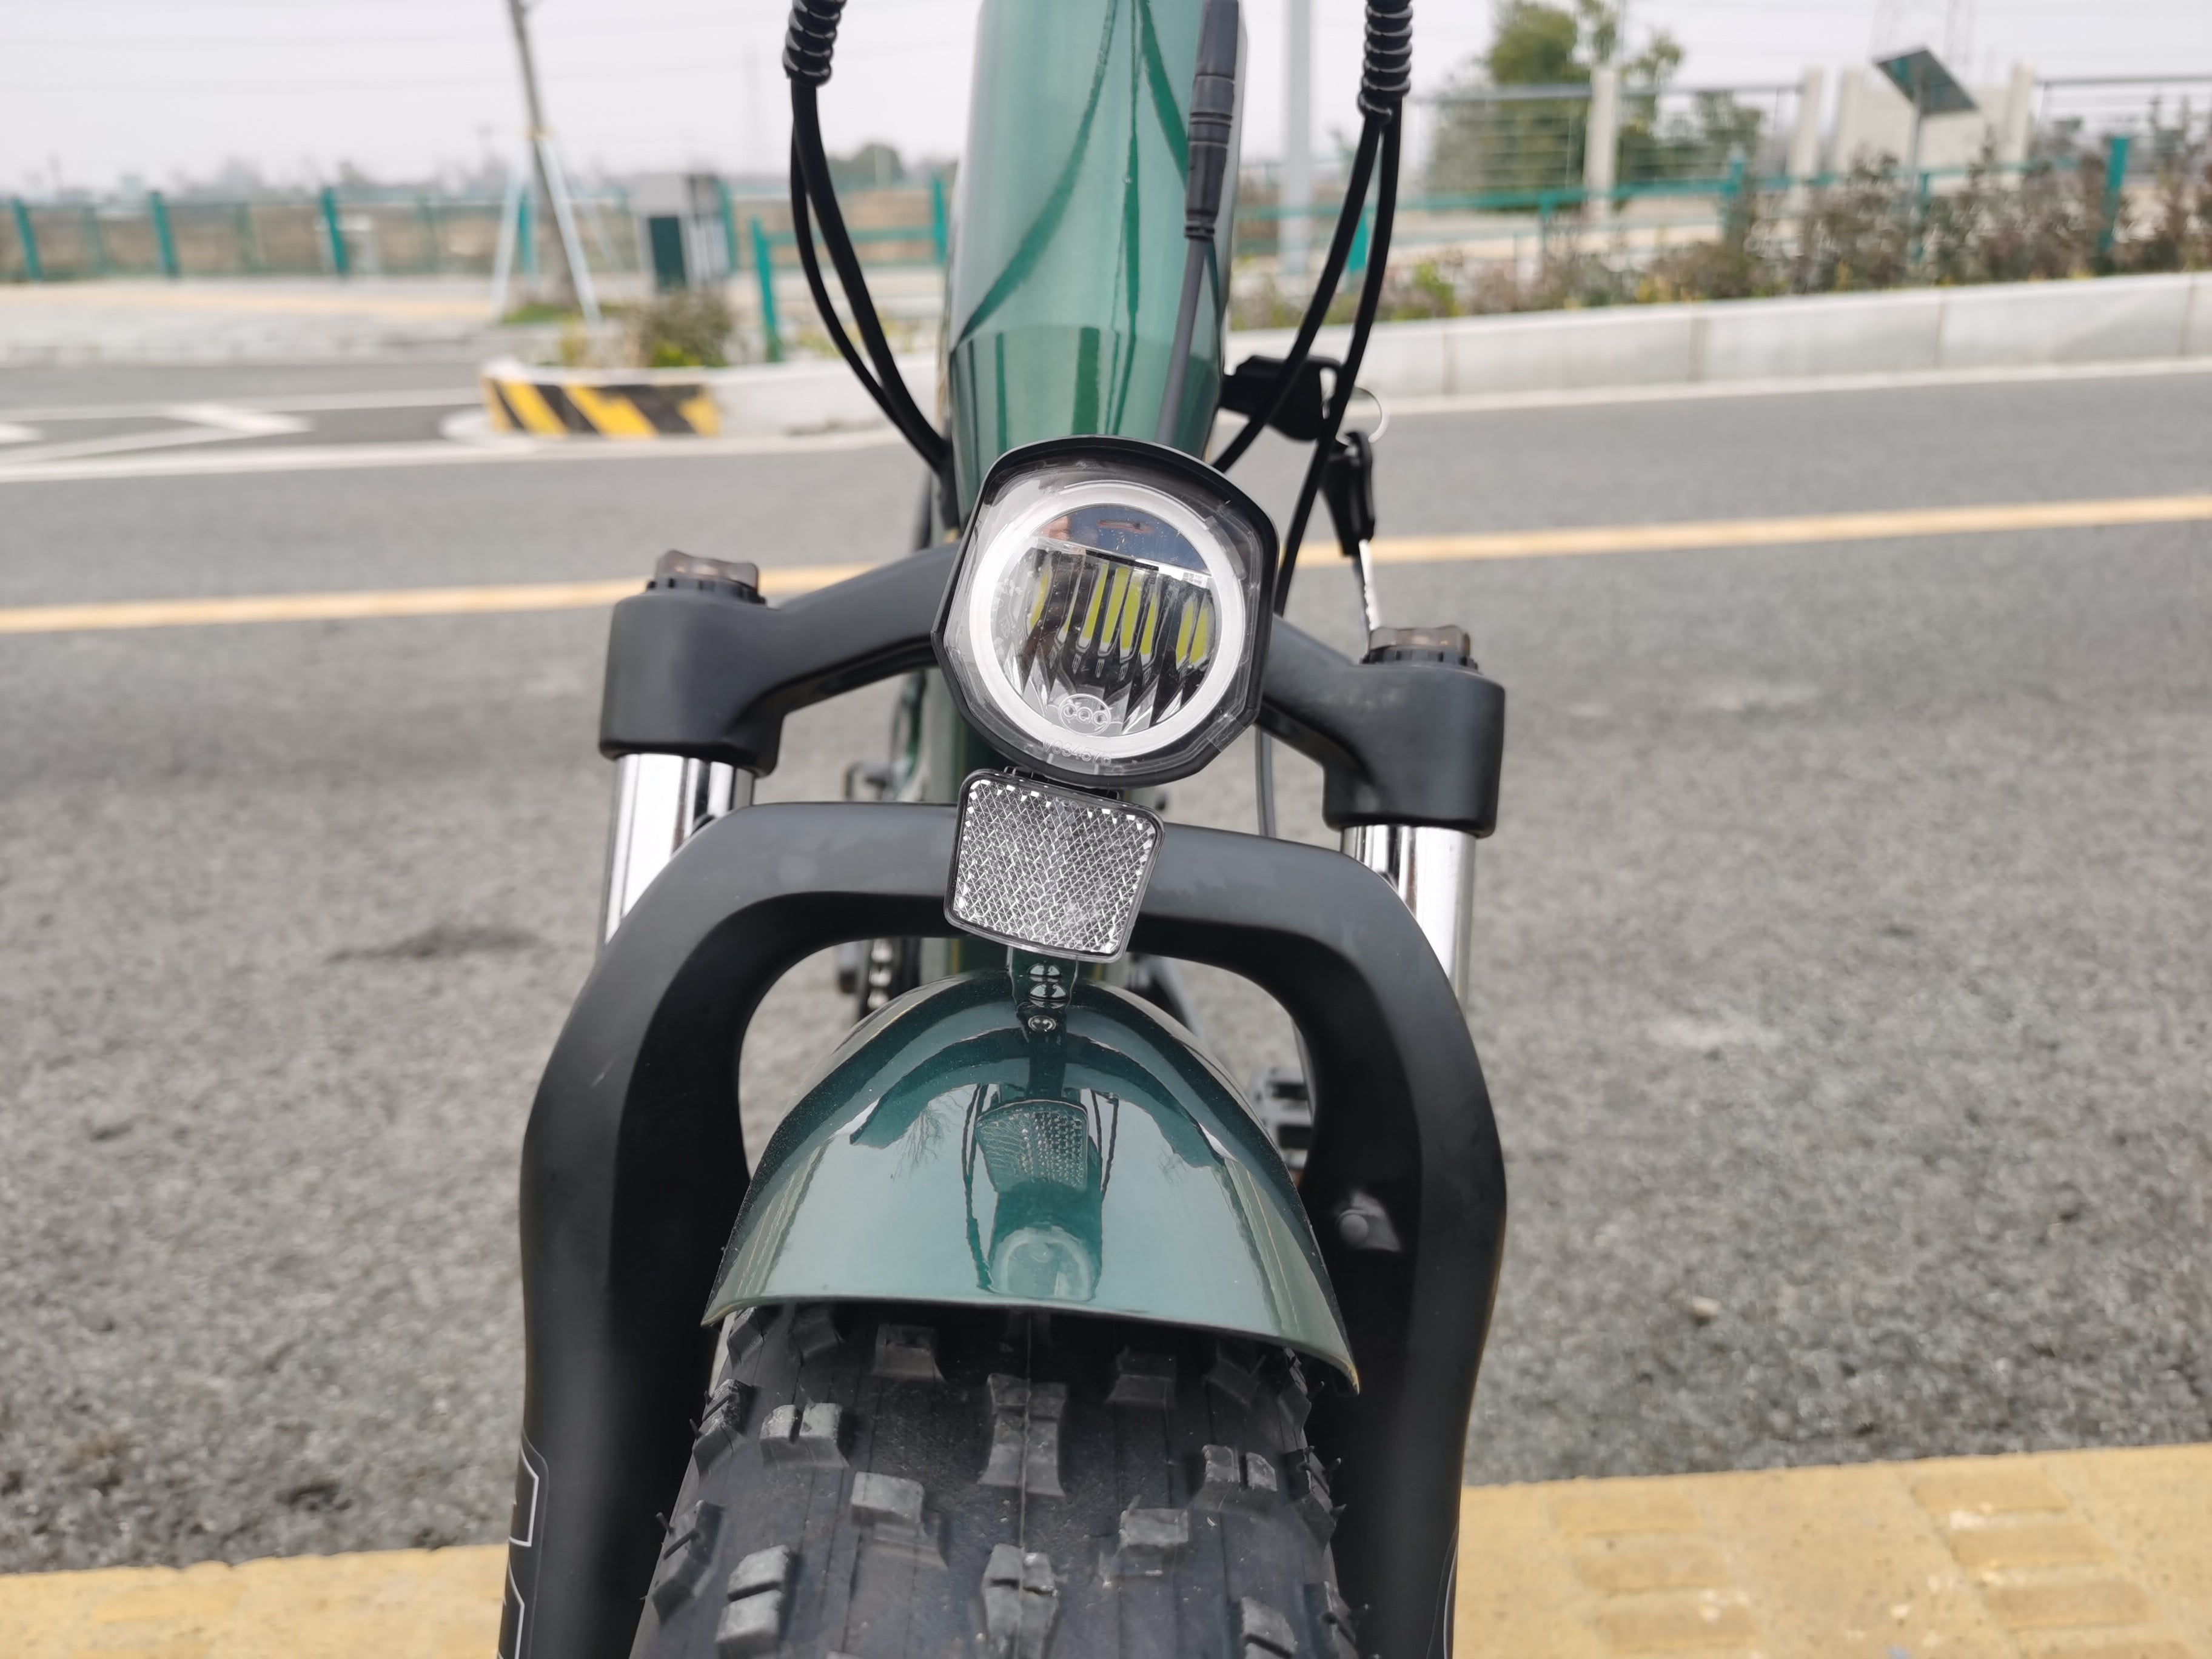 FT-016 "Thunder": 500W BAFANG  with Integrated 48V/14AH Samsung Battery